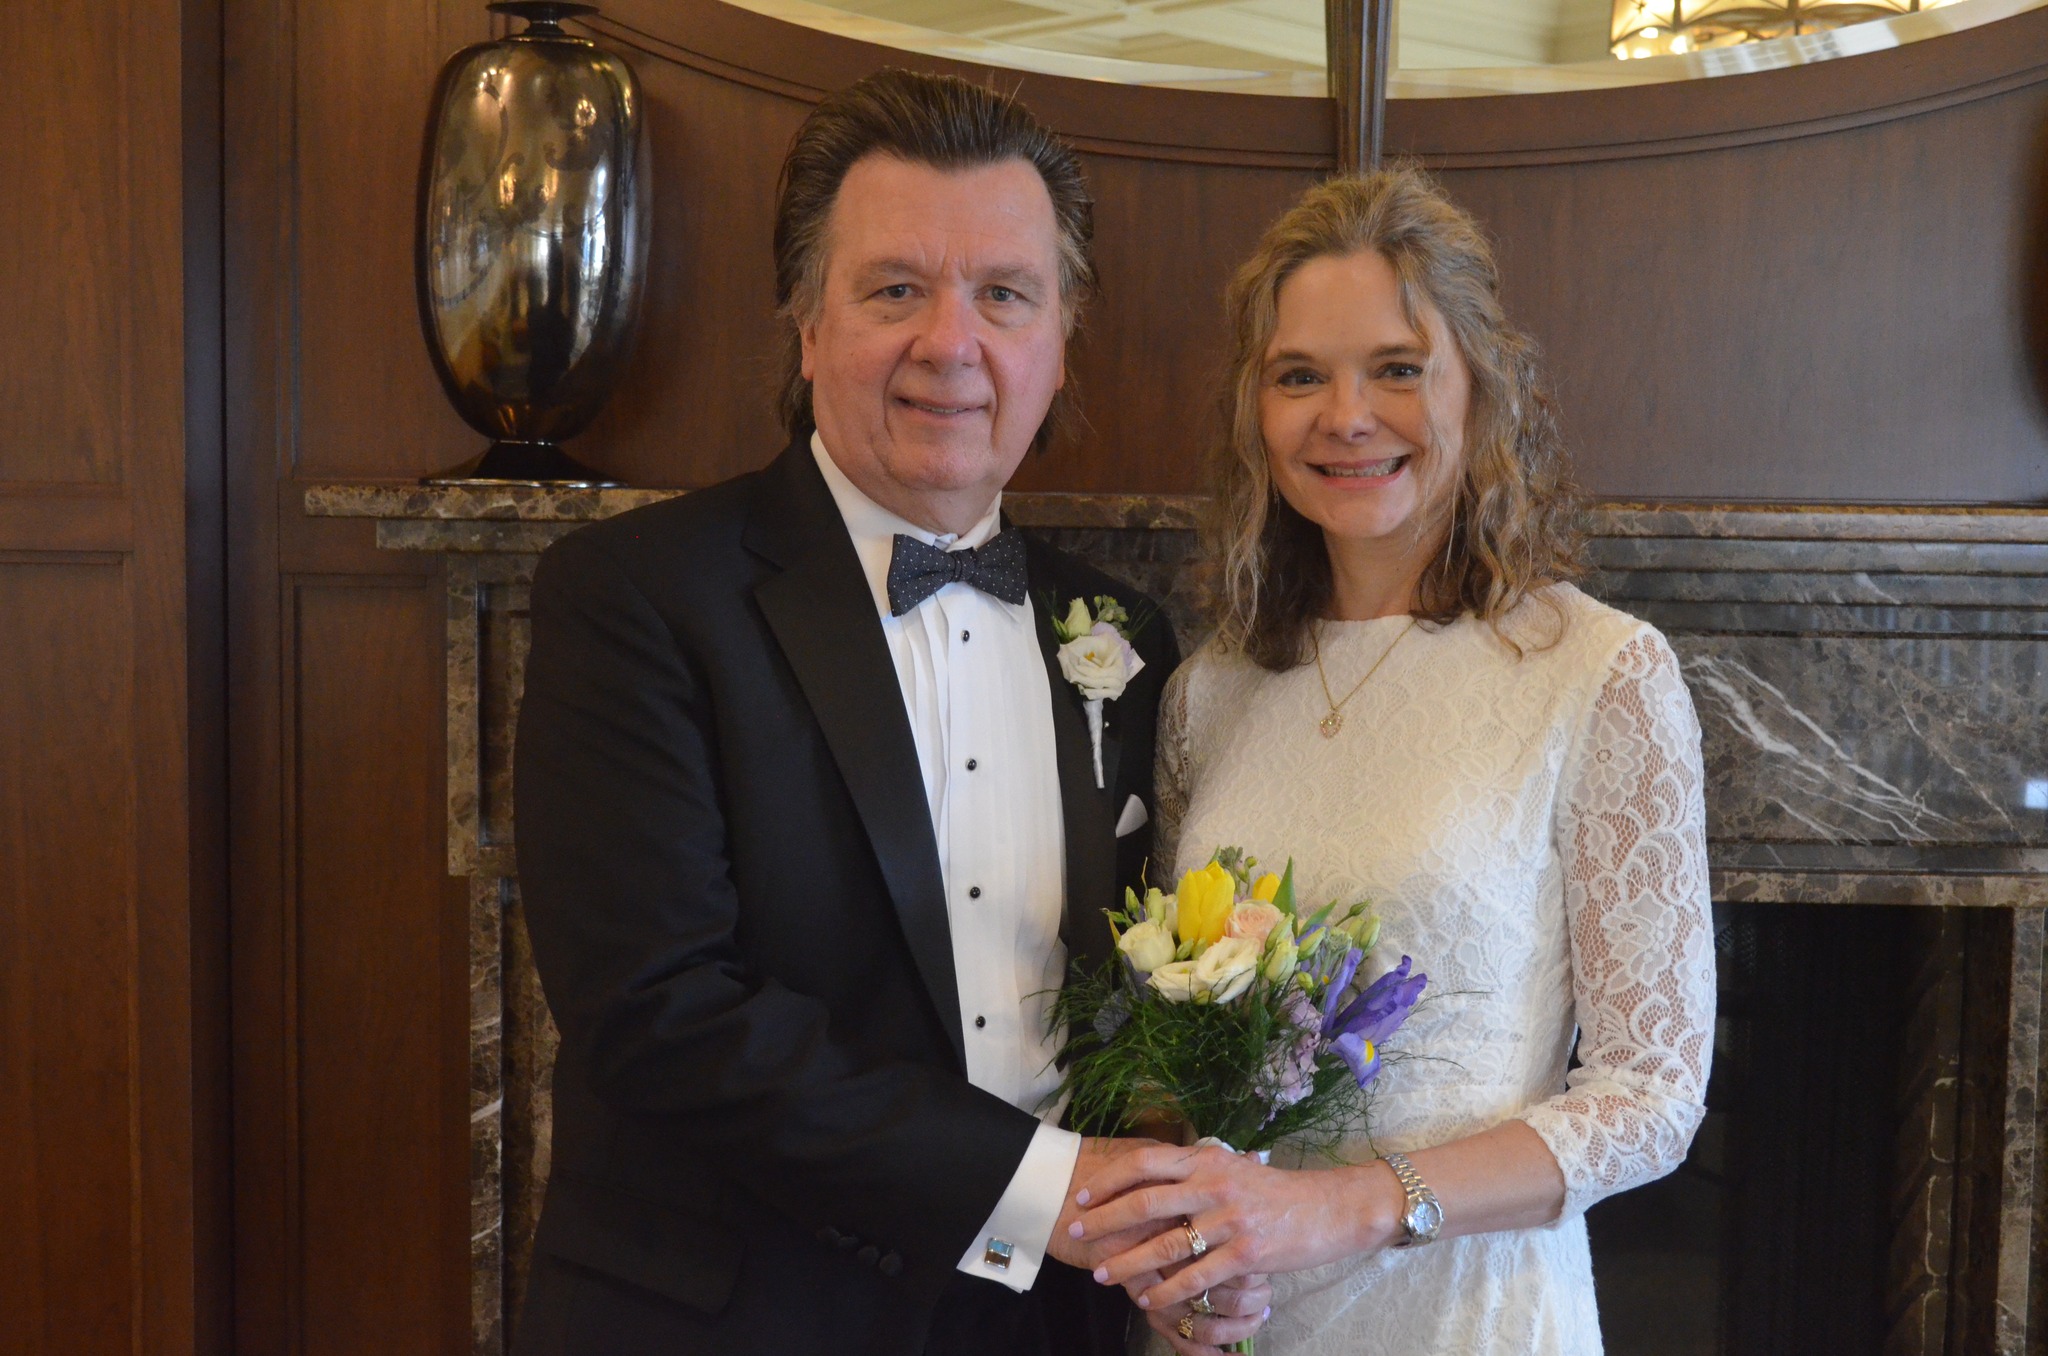 James Fitzgerald with his wife, Natalie Schilling, at their wedding ceremony